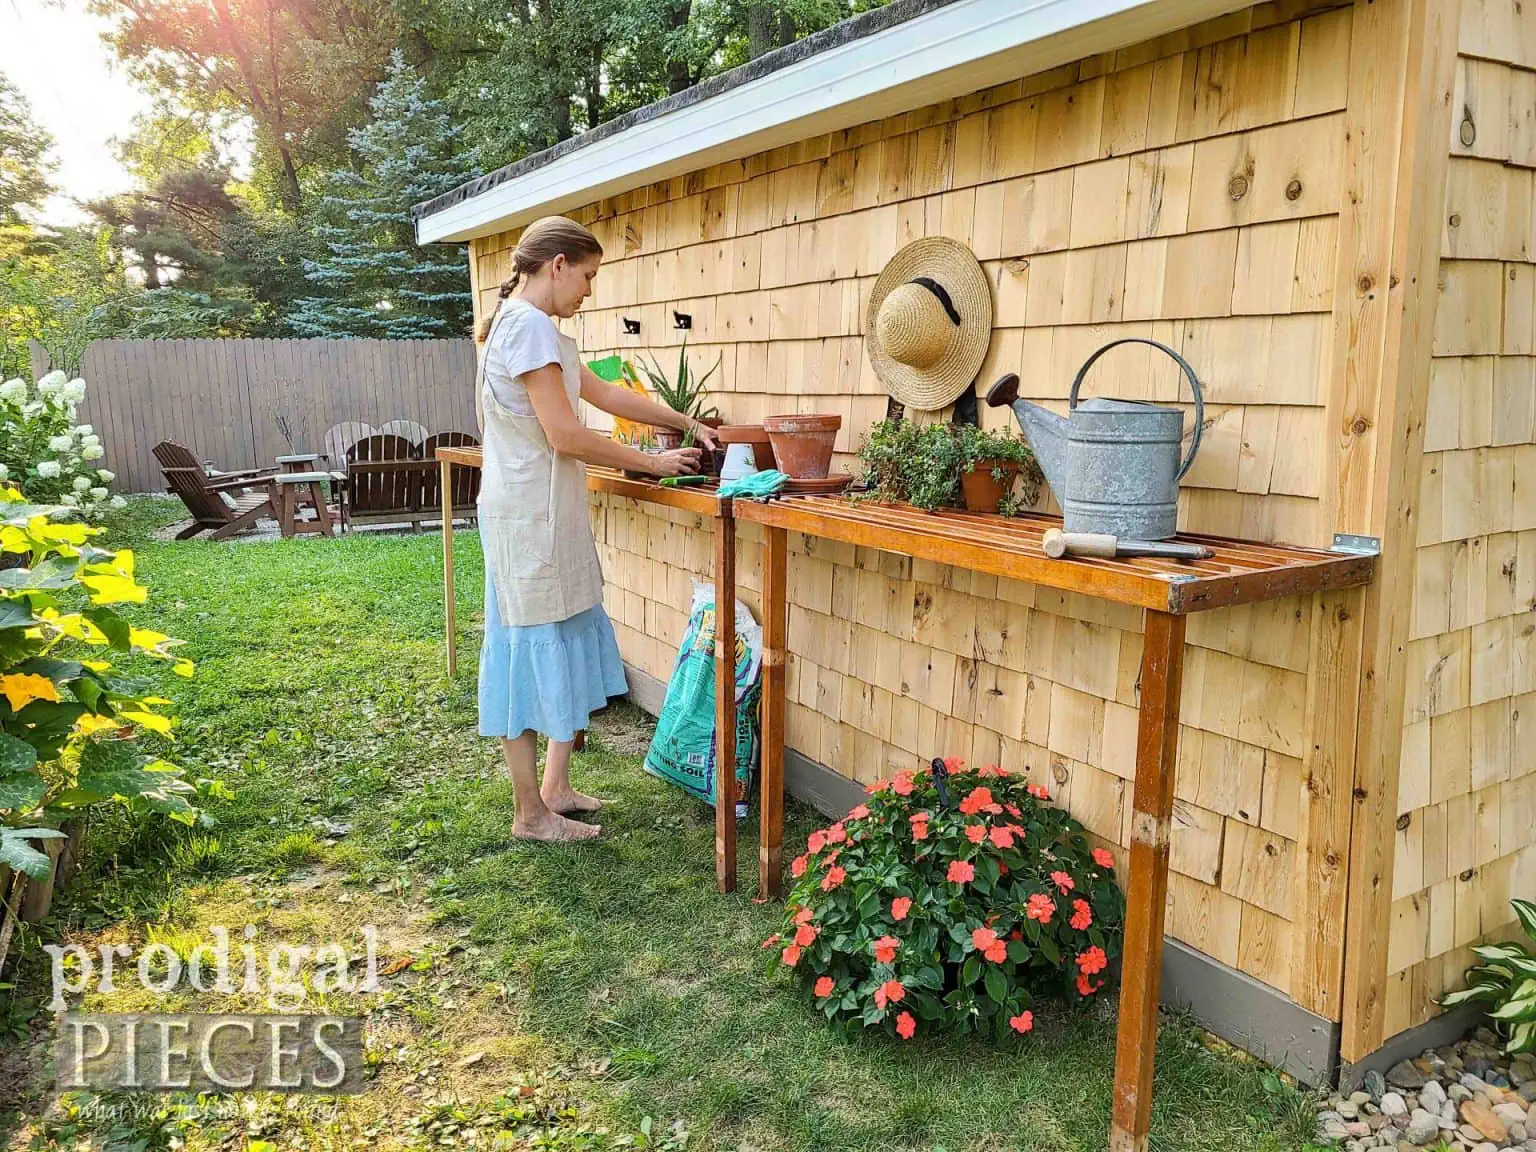 Collapsable potting benches attached to shed